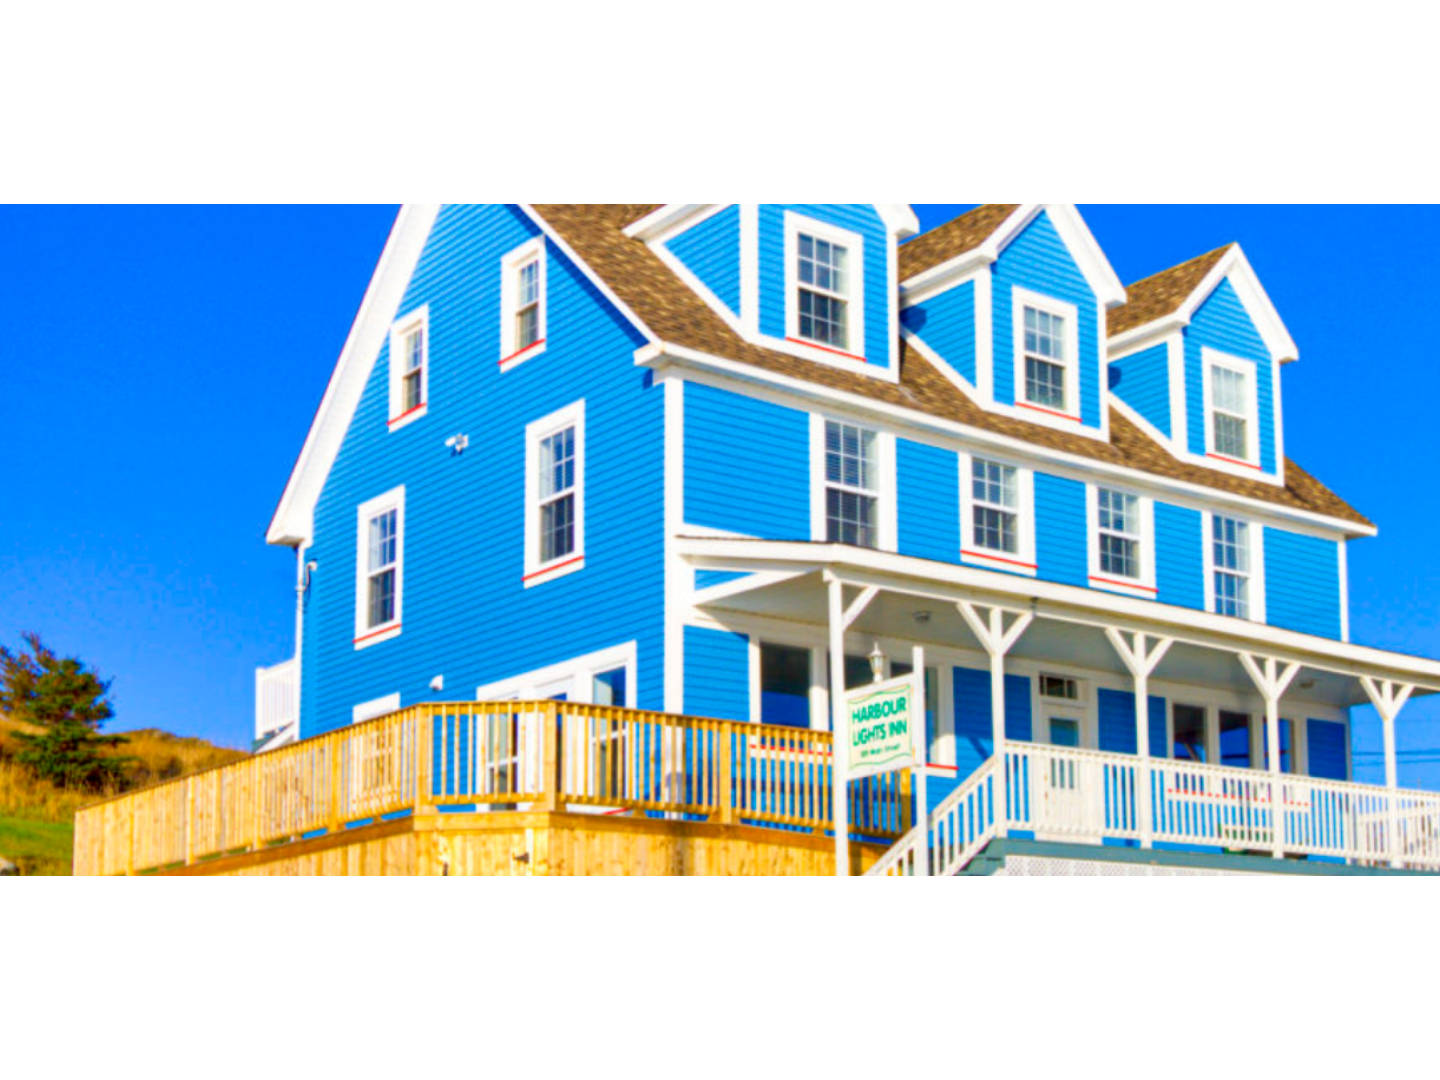 Twillingate Bed and Breakfast